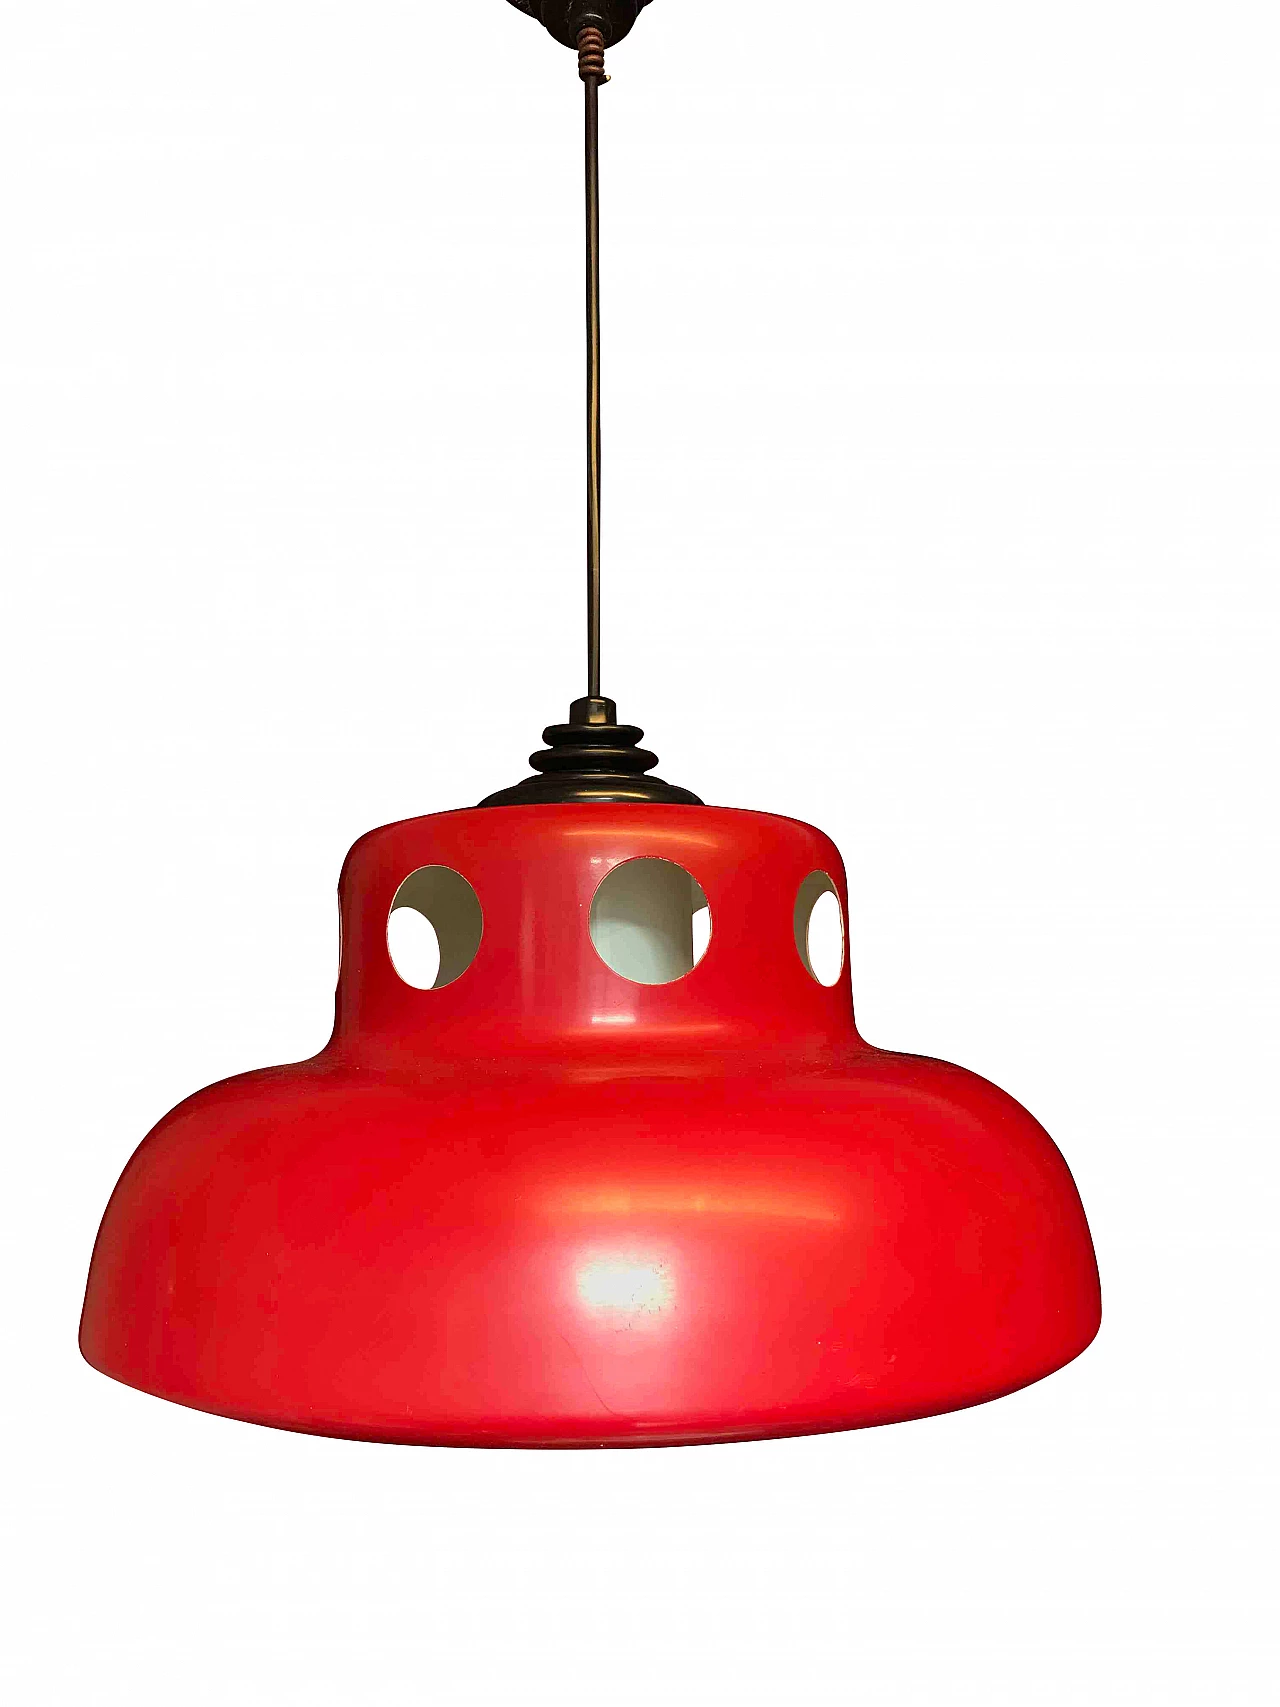 Red ceiling lamp, by Isao Hosoe for Valenti, 1960s 1081892